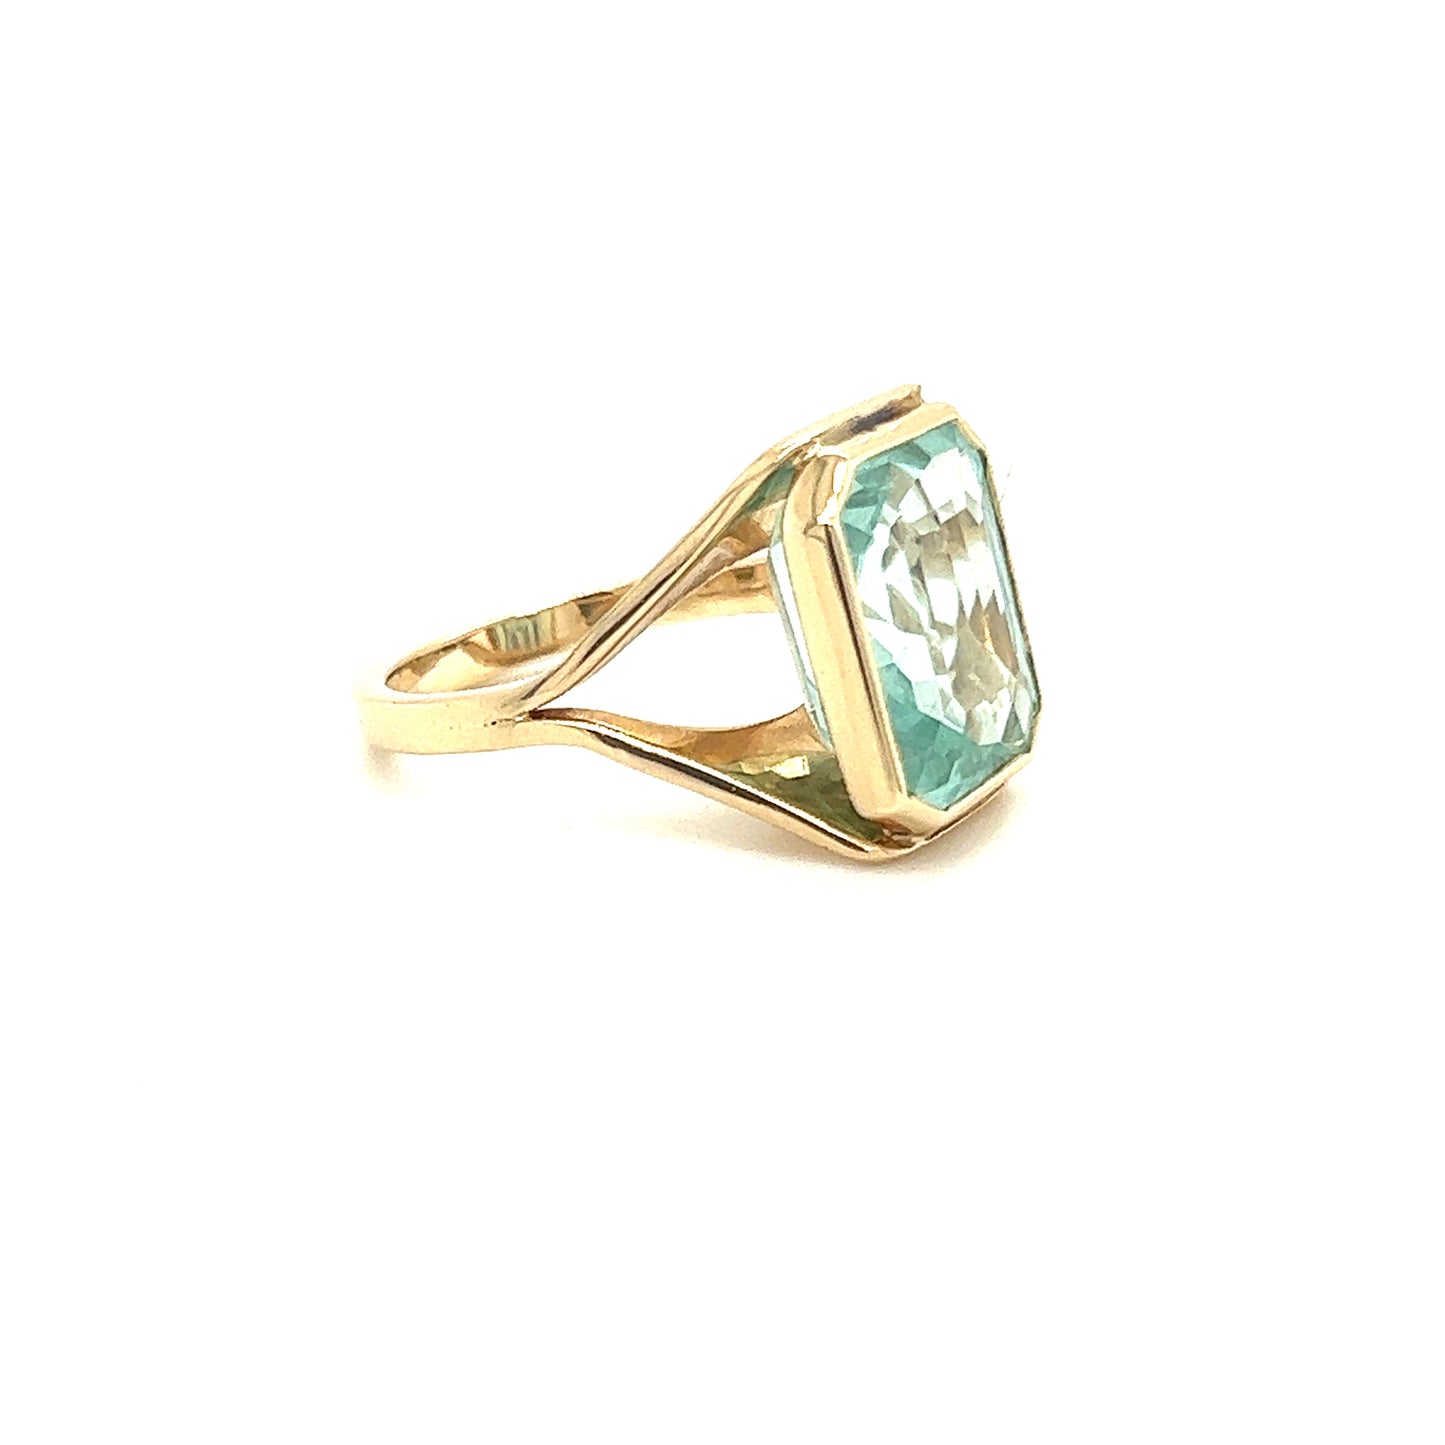 Blue Topaz Ring with Split Shank Setting in 14K Yellow Gold Left Side View